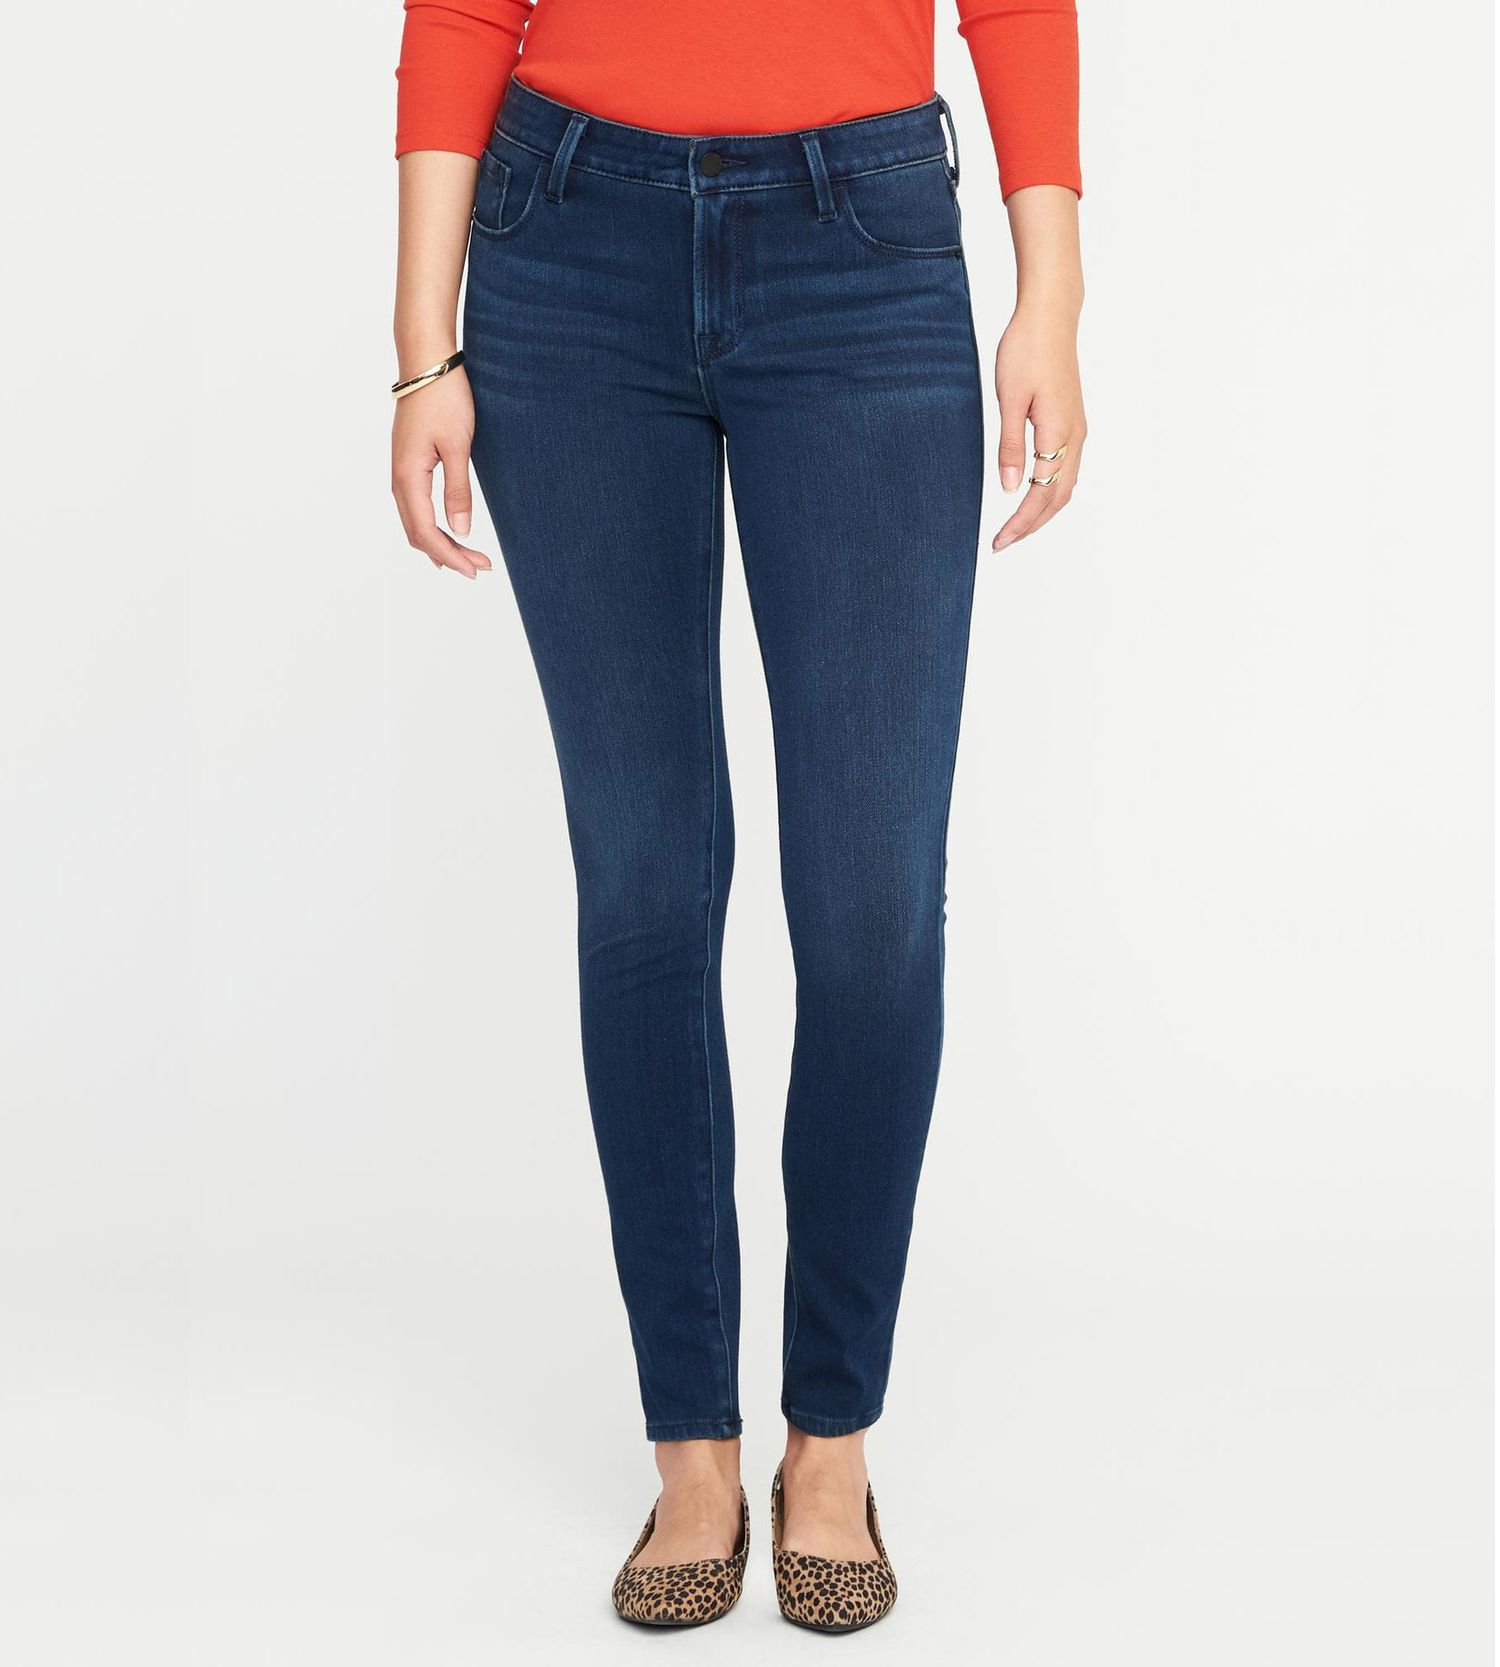 old navy womens jeans clearance